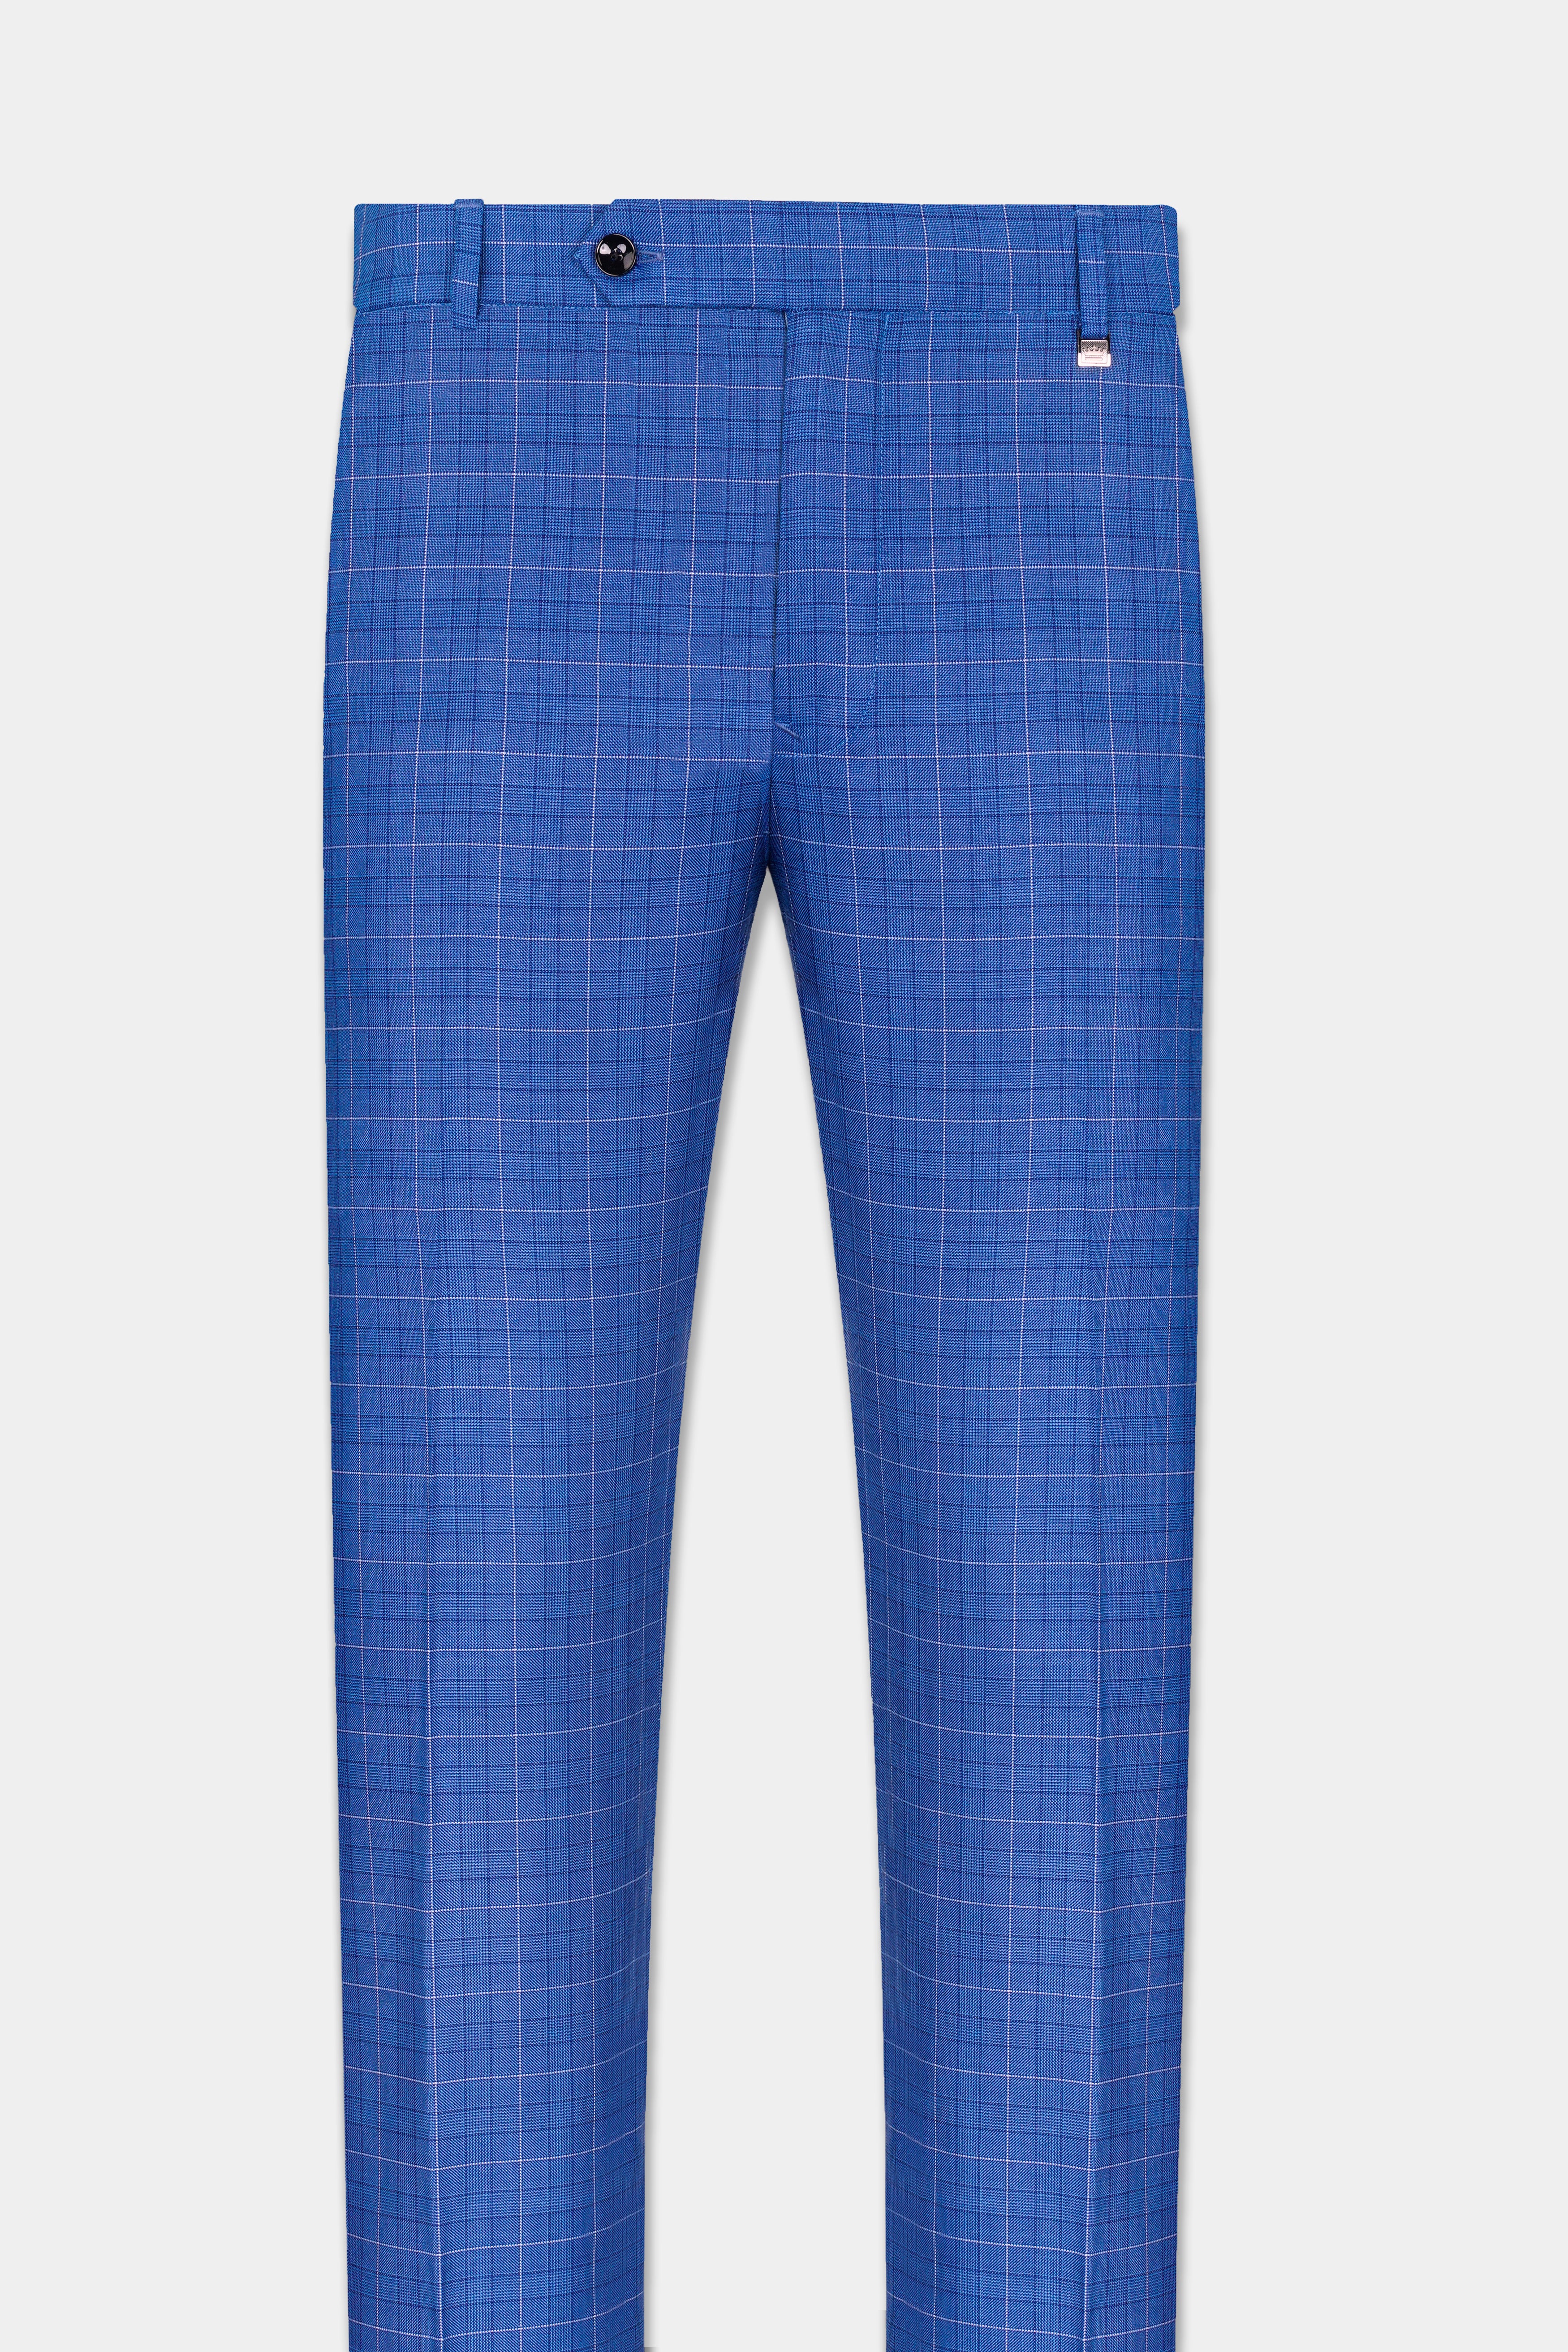 Cobalt Blue Checkered Wool Rich Stretchable Pant T2947-SW-28, T2947-SW-30, T2947-SW-32, T2947-SW-34, T2947-SW-36, T2947-SW-38, T2947-SW-40, T2947-SW-42, T2947-SW-44